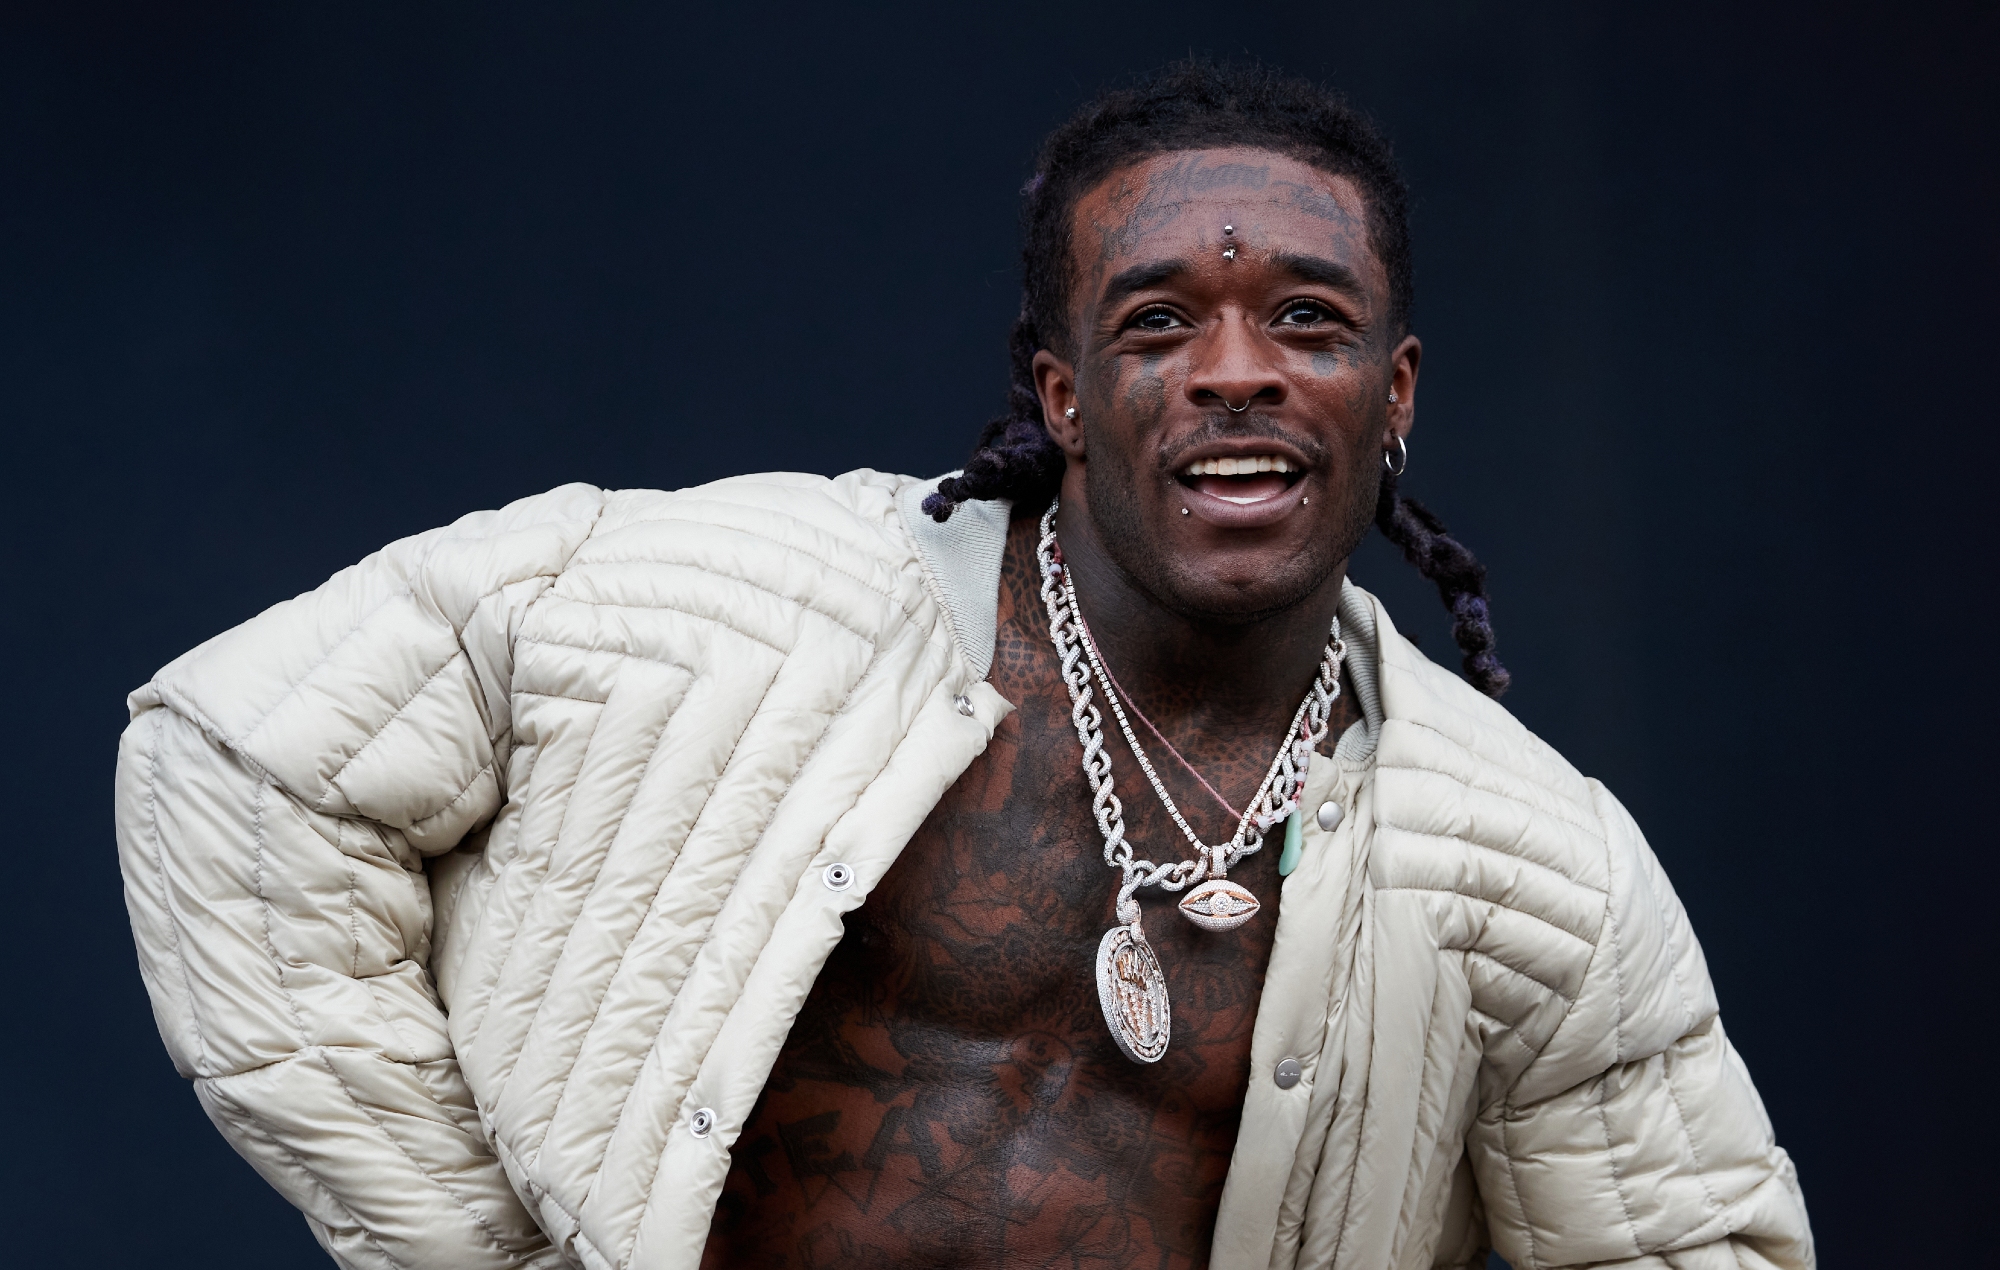 Lil Uzi Vert comes out as non-binary; changes pronouns to ‘They/Them